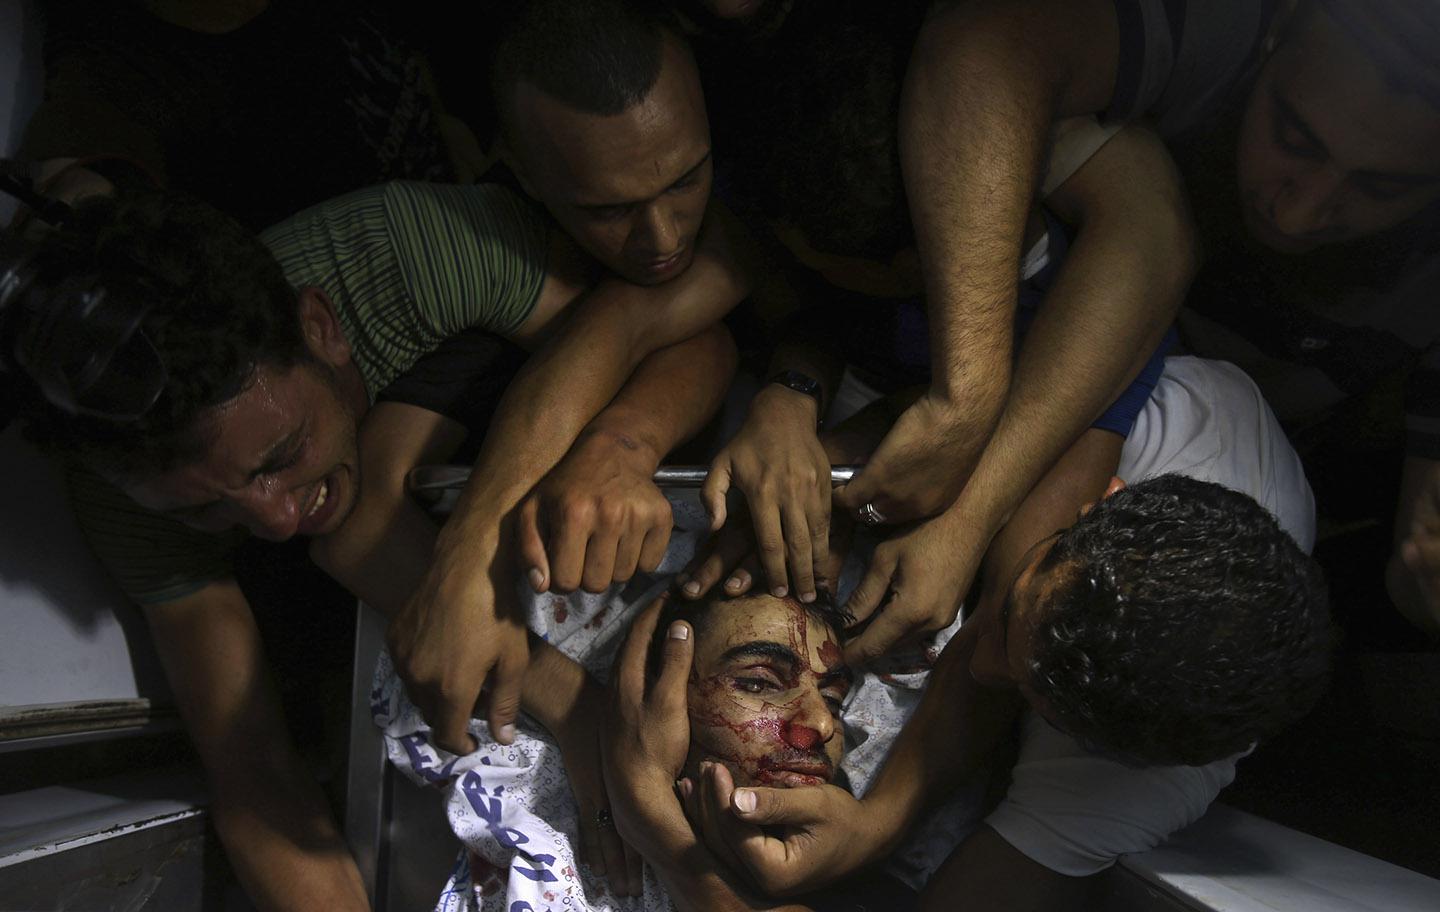 People mourn around the body of a Palestinian militant at a hospital morgue in the central Gaza Strip July 6, 2014.